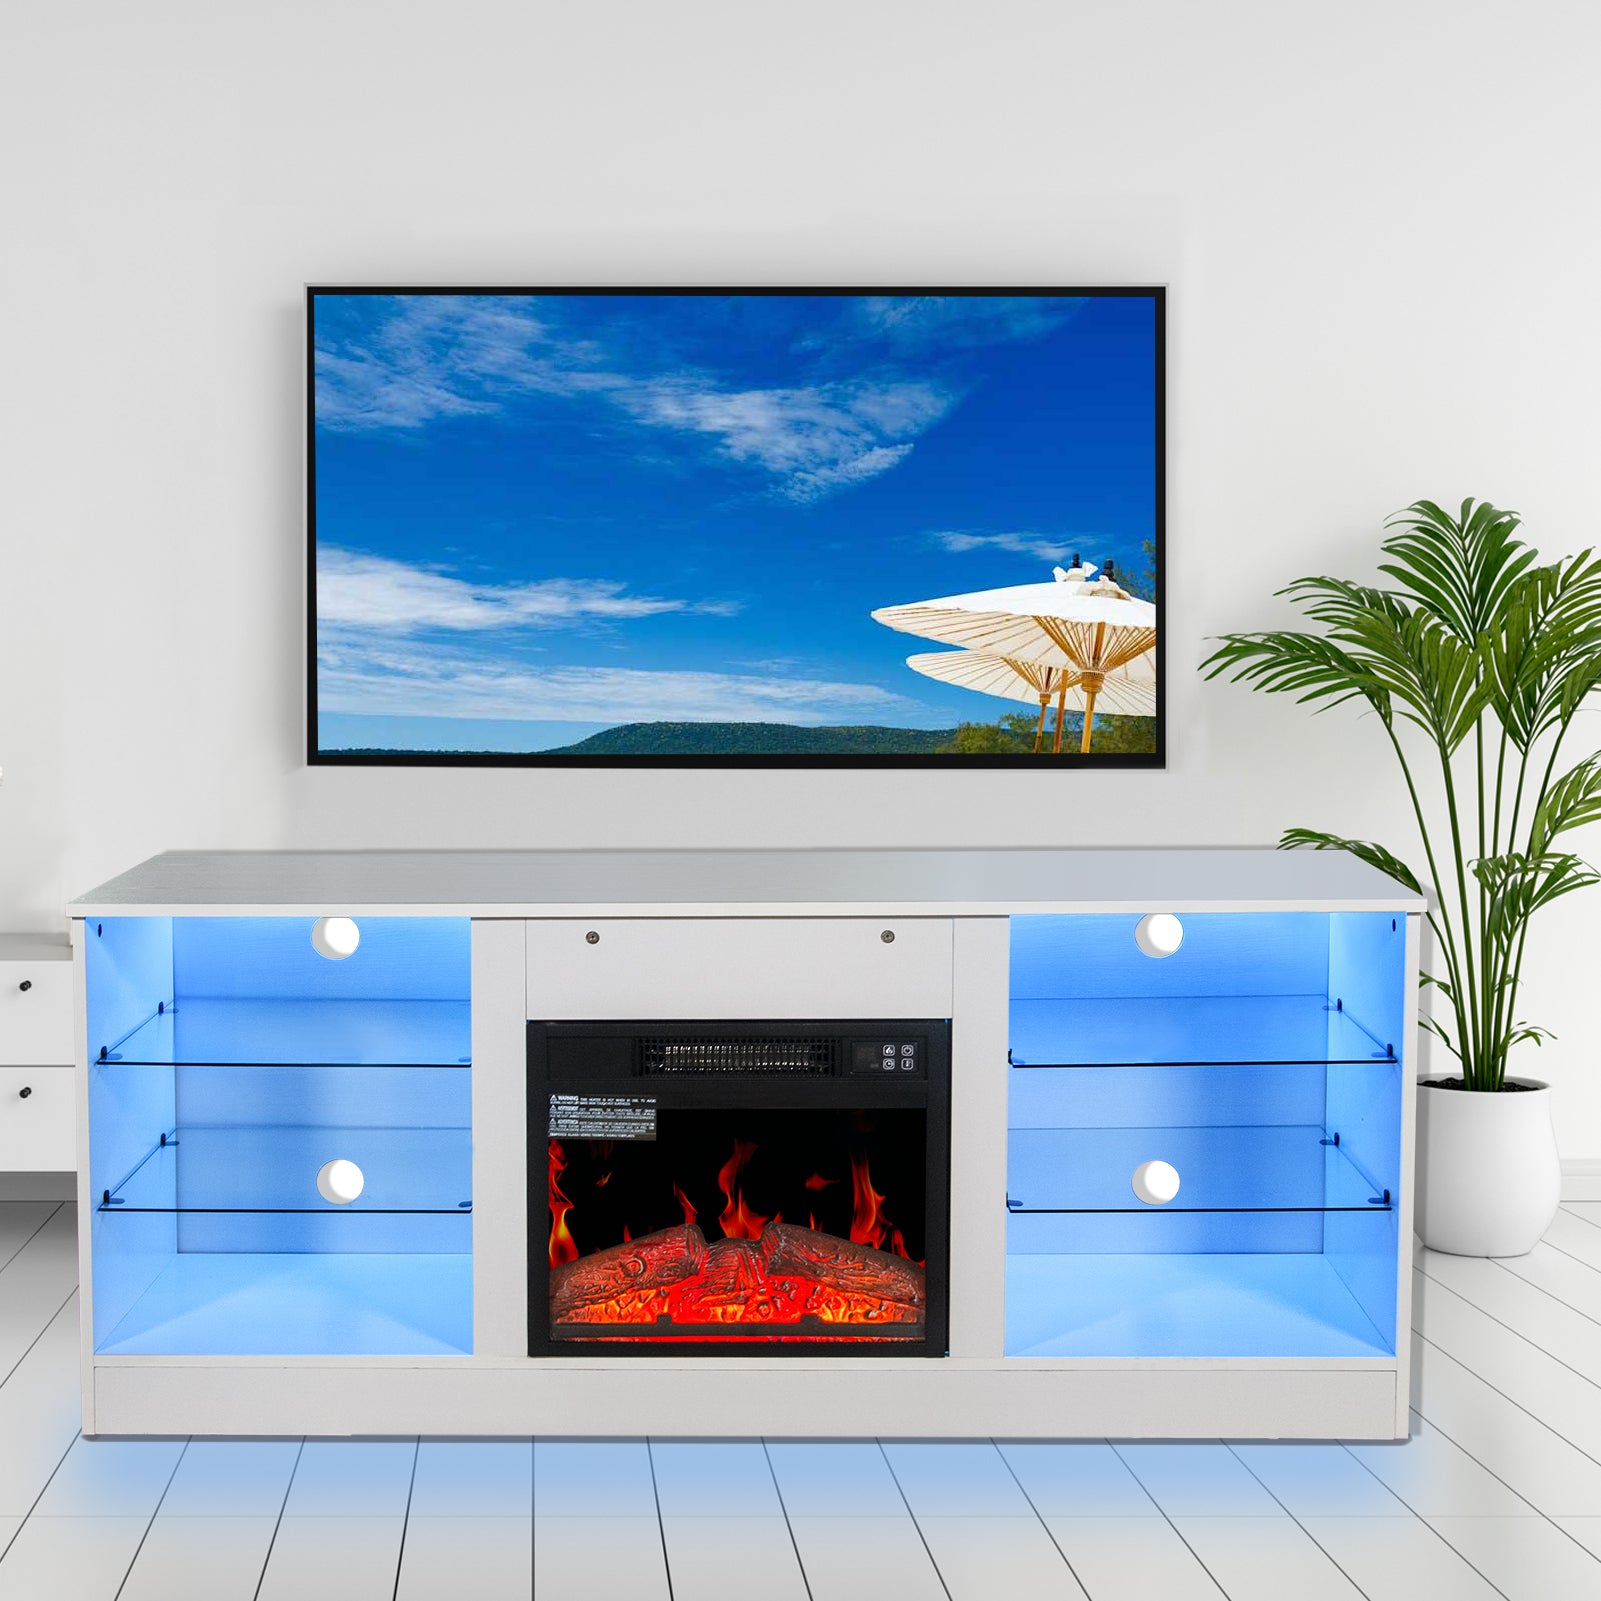 Modern Fireplace TV Stand Entertainment Center for TVs up to 62 Inch with 18 Inch Electric Fireplace Heater, Adjustable Glass Shelves and Storage Cabinets (White)